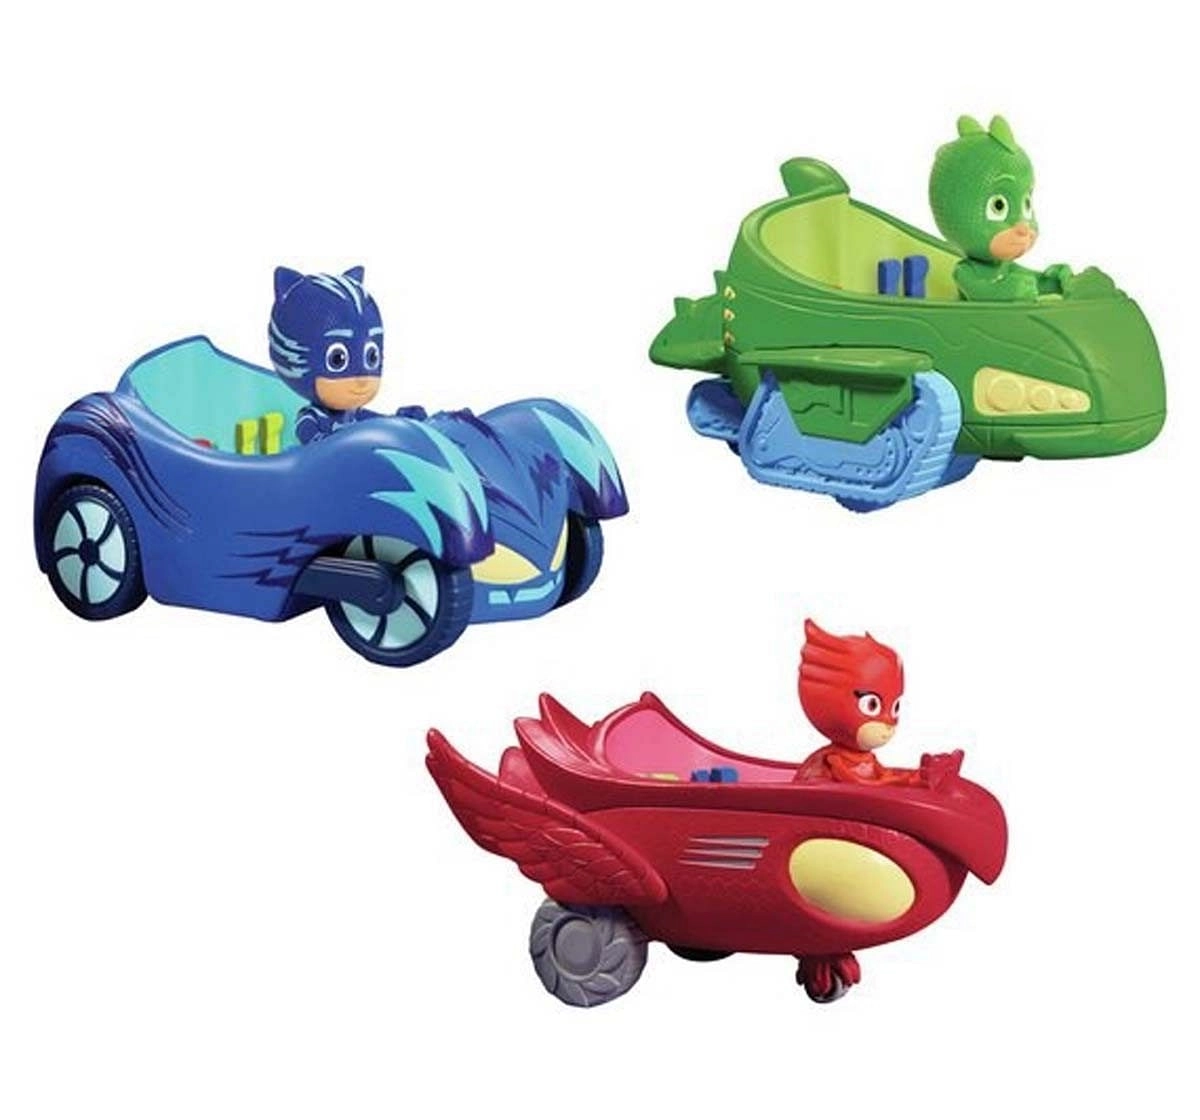 Pj Masks Vehicles Assorted Activity Toys for Kids Age 3Y+